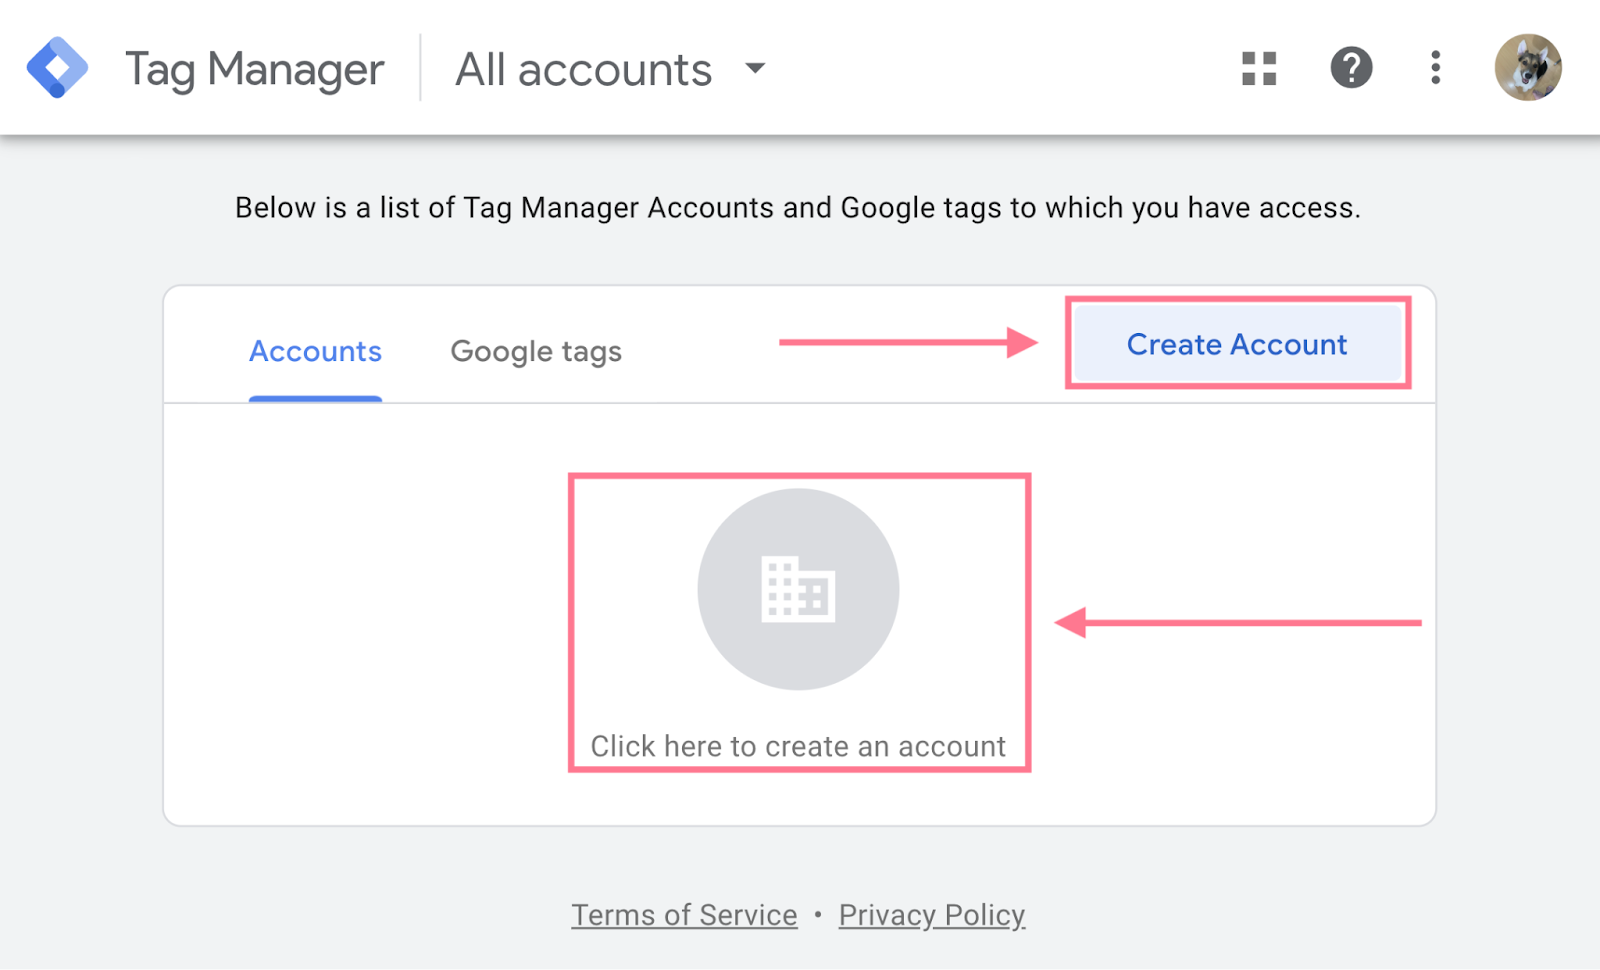 create account button highlighted